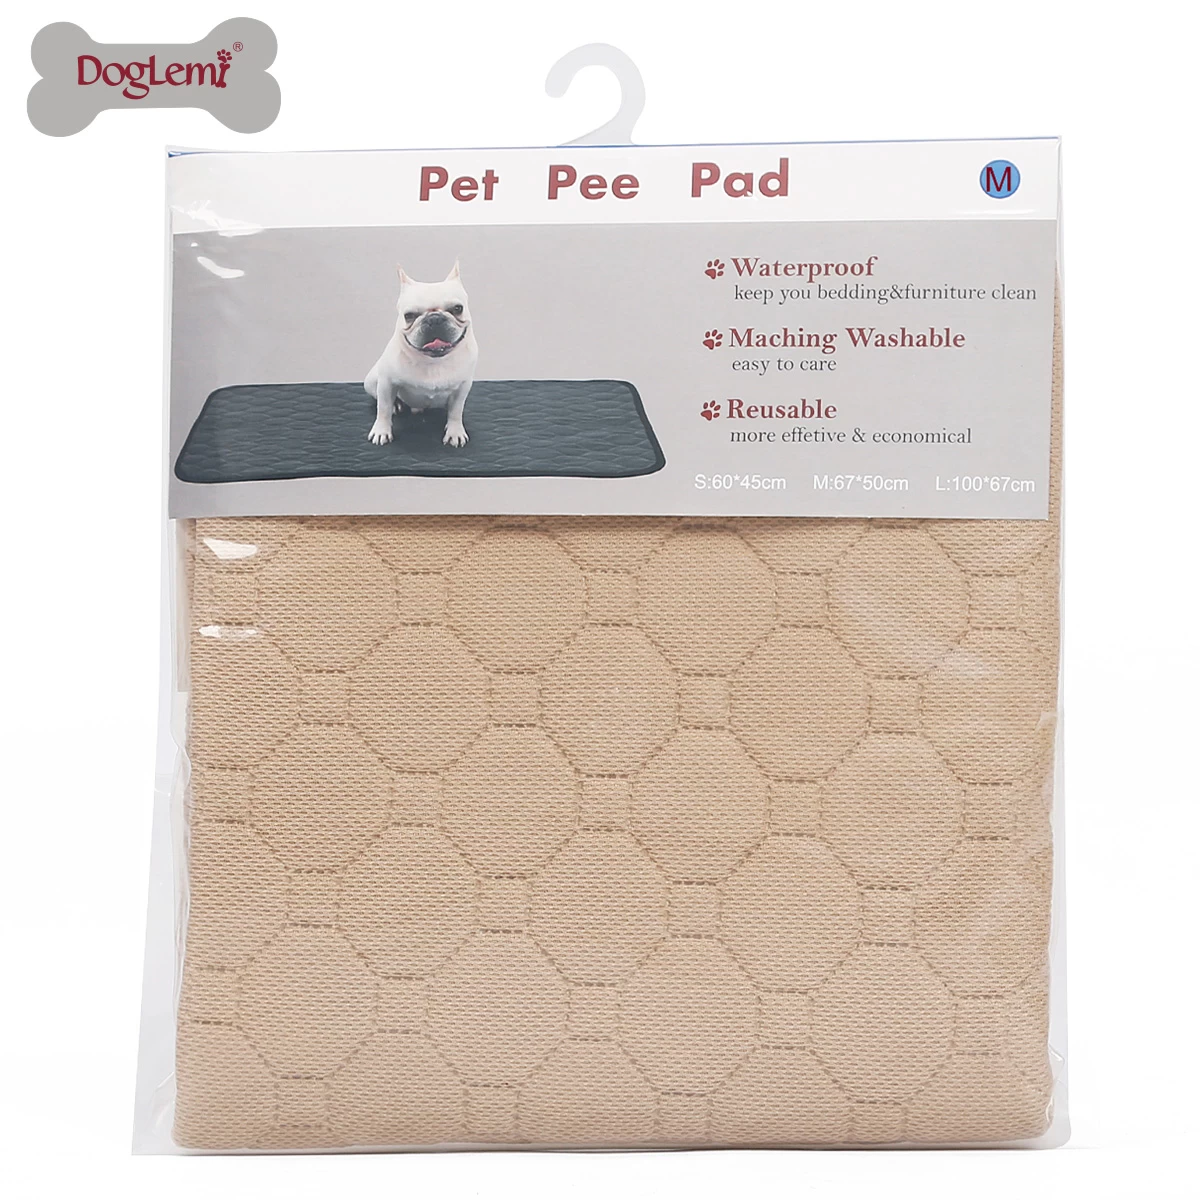 Washable pet diapers